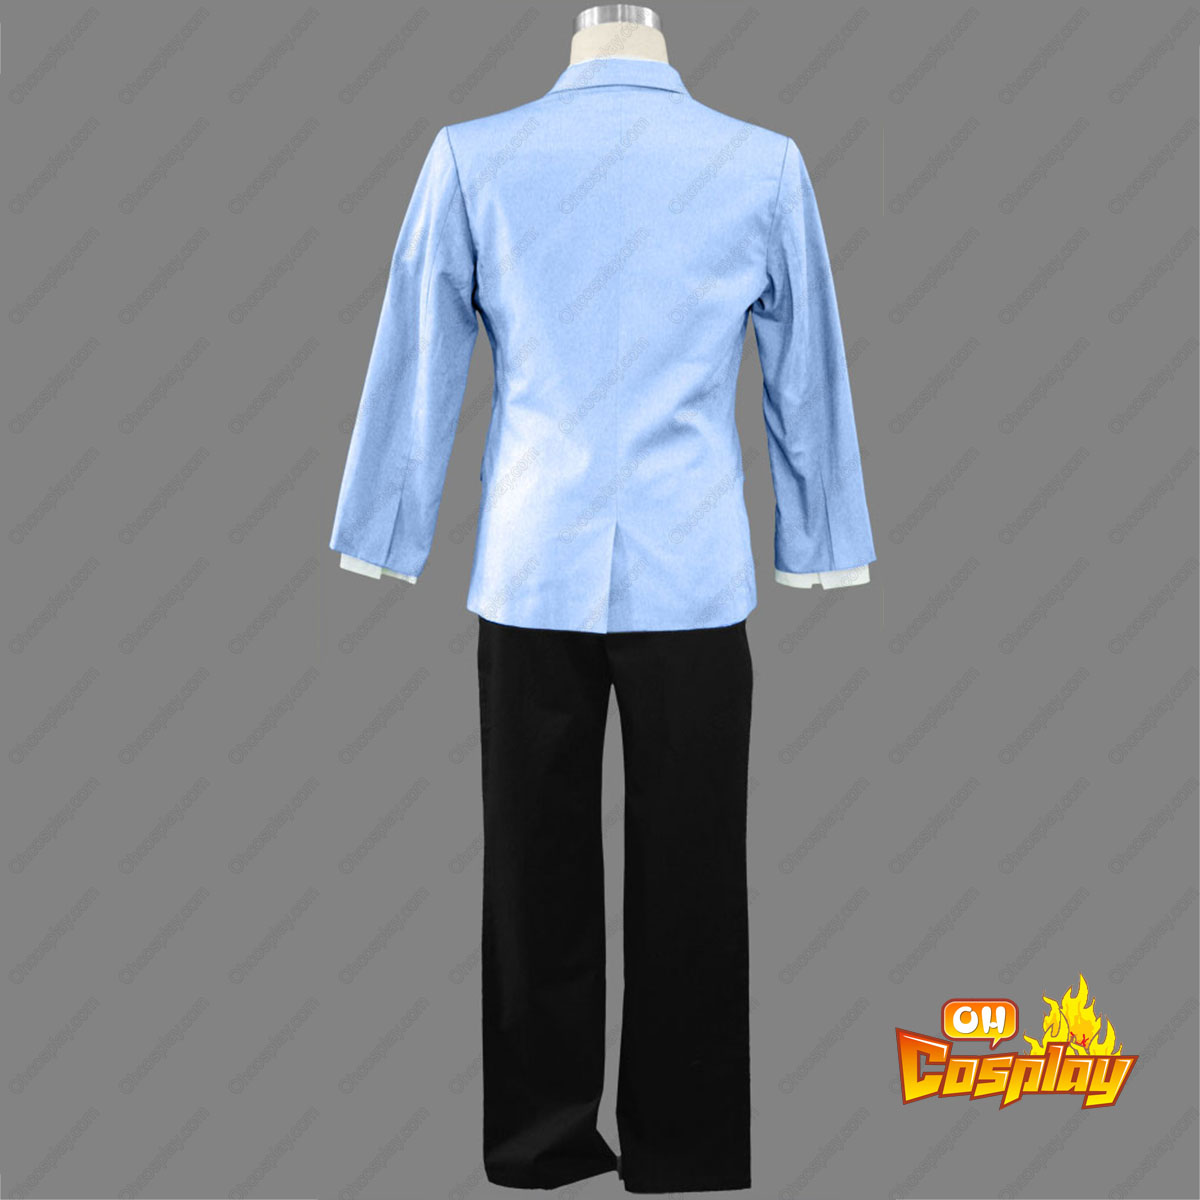 Ouran High School Host Club Male Uniforms Blue Cosplay Costumes Deluxe Edition